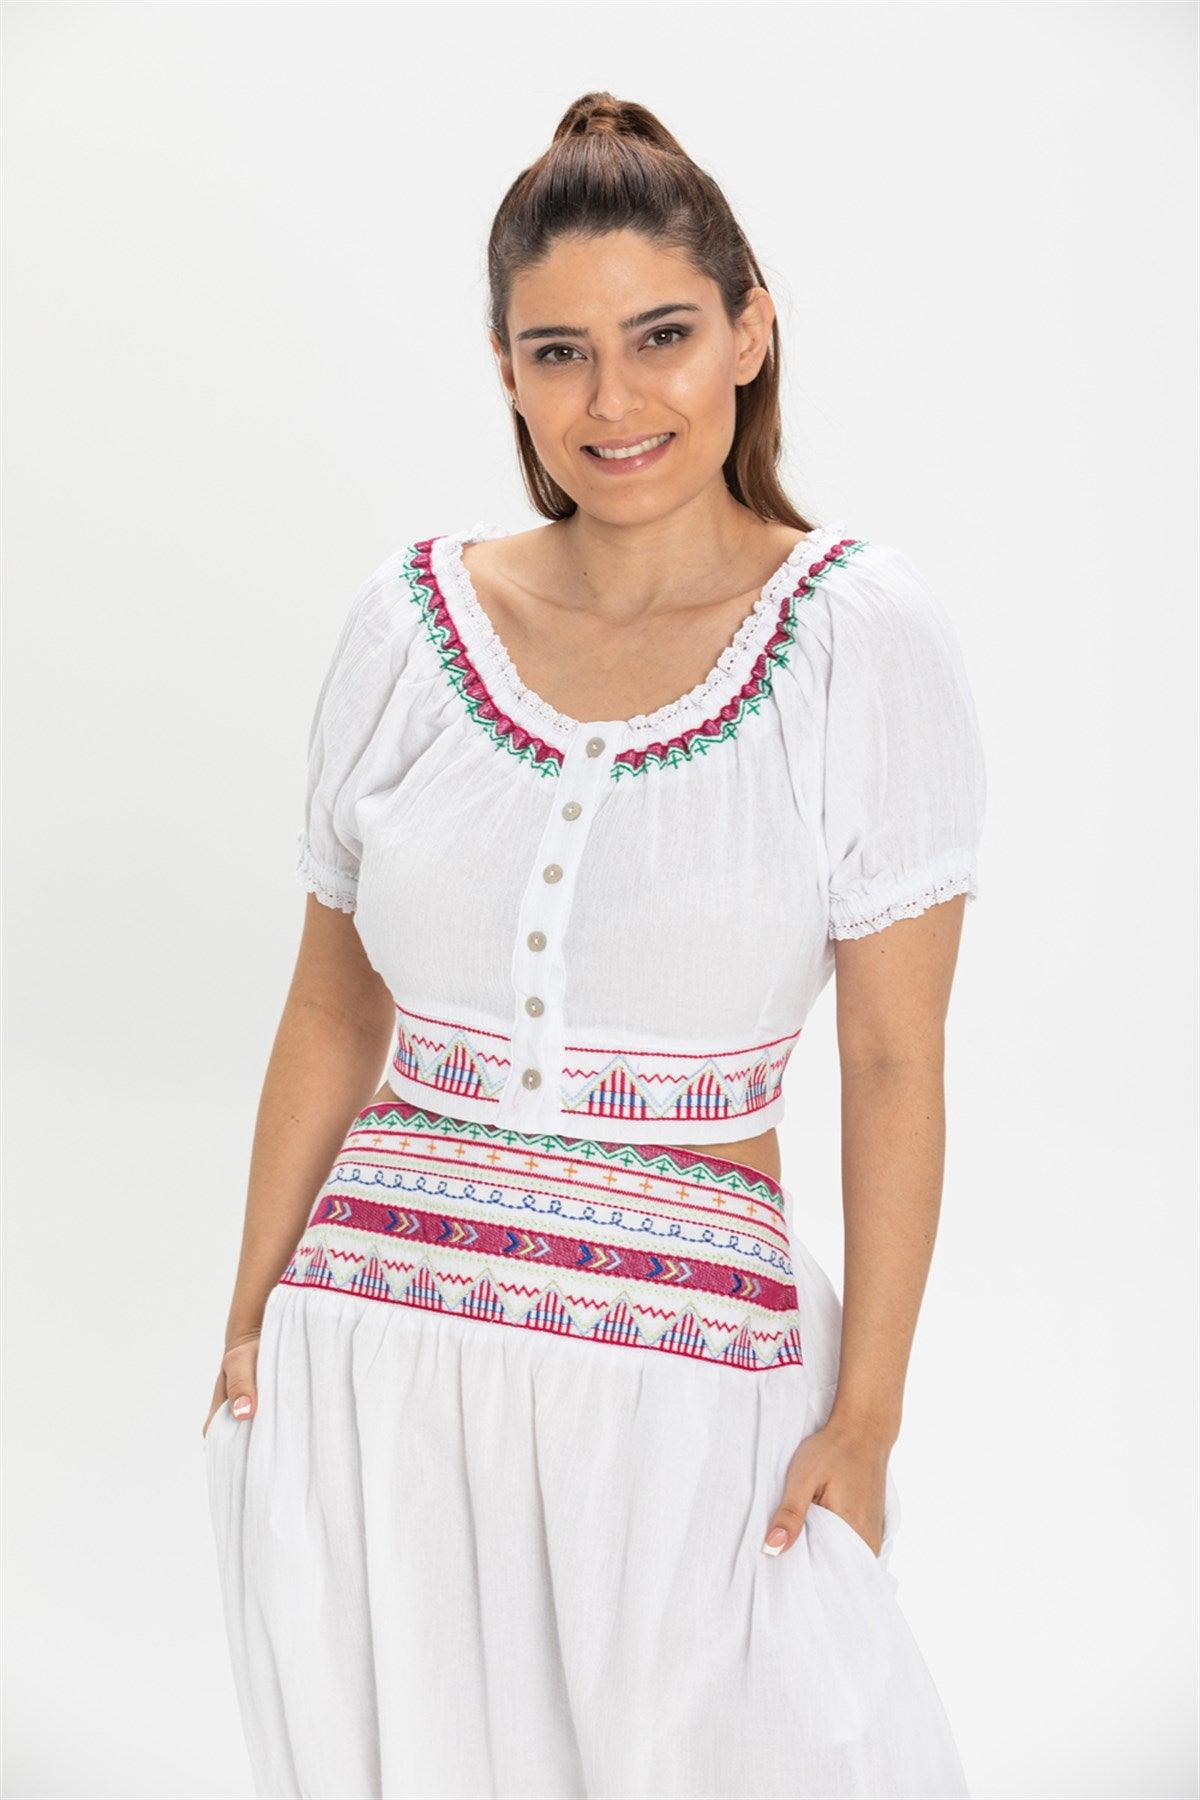 Short Sleeve Off The Shoulder Ethnic Embroidered Button Down White Bustier - trendynow